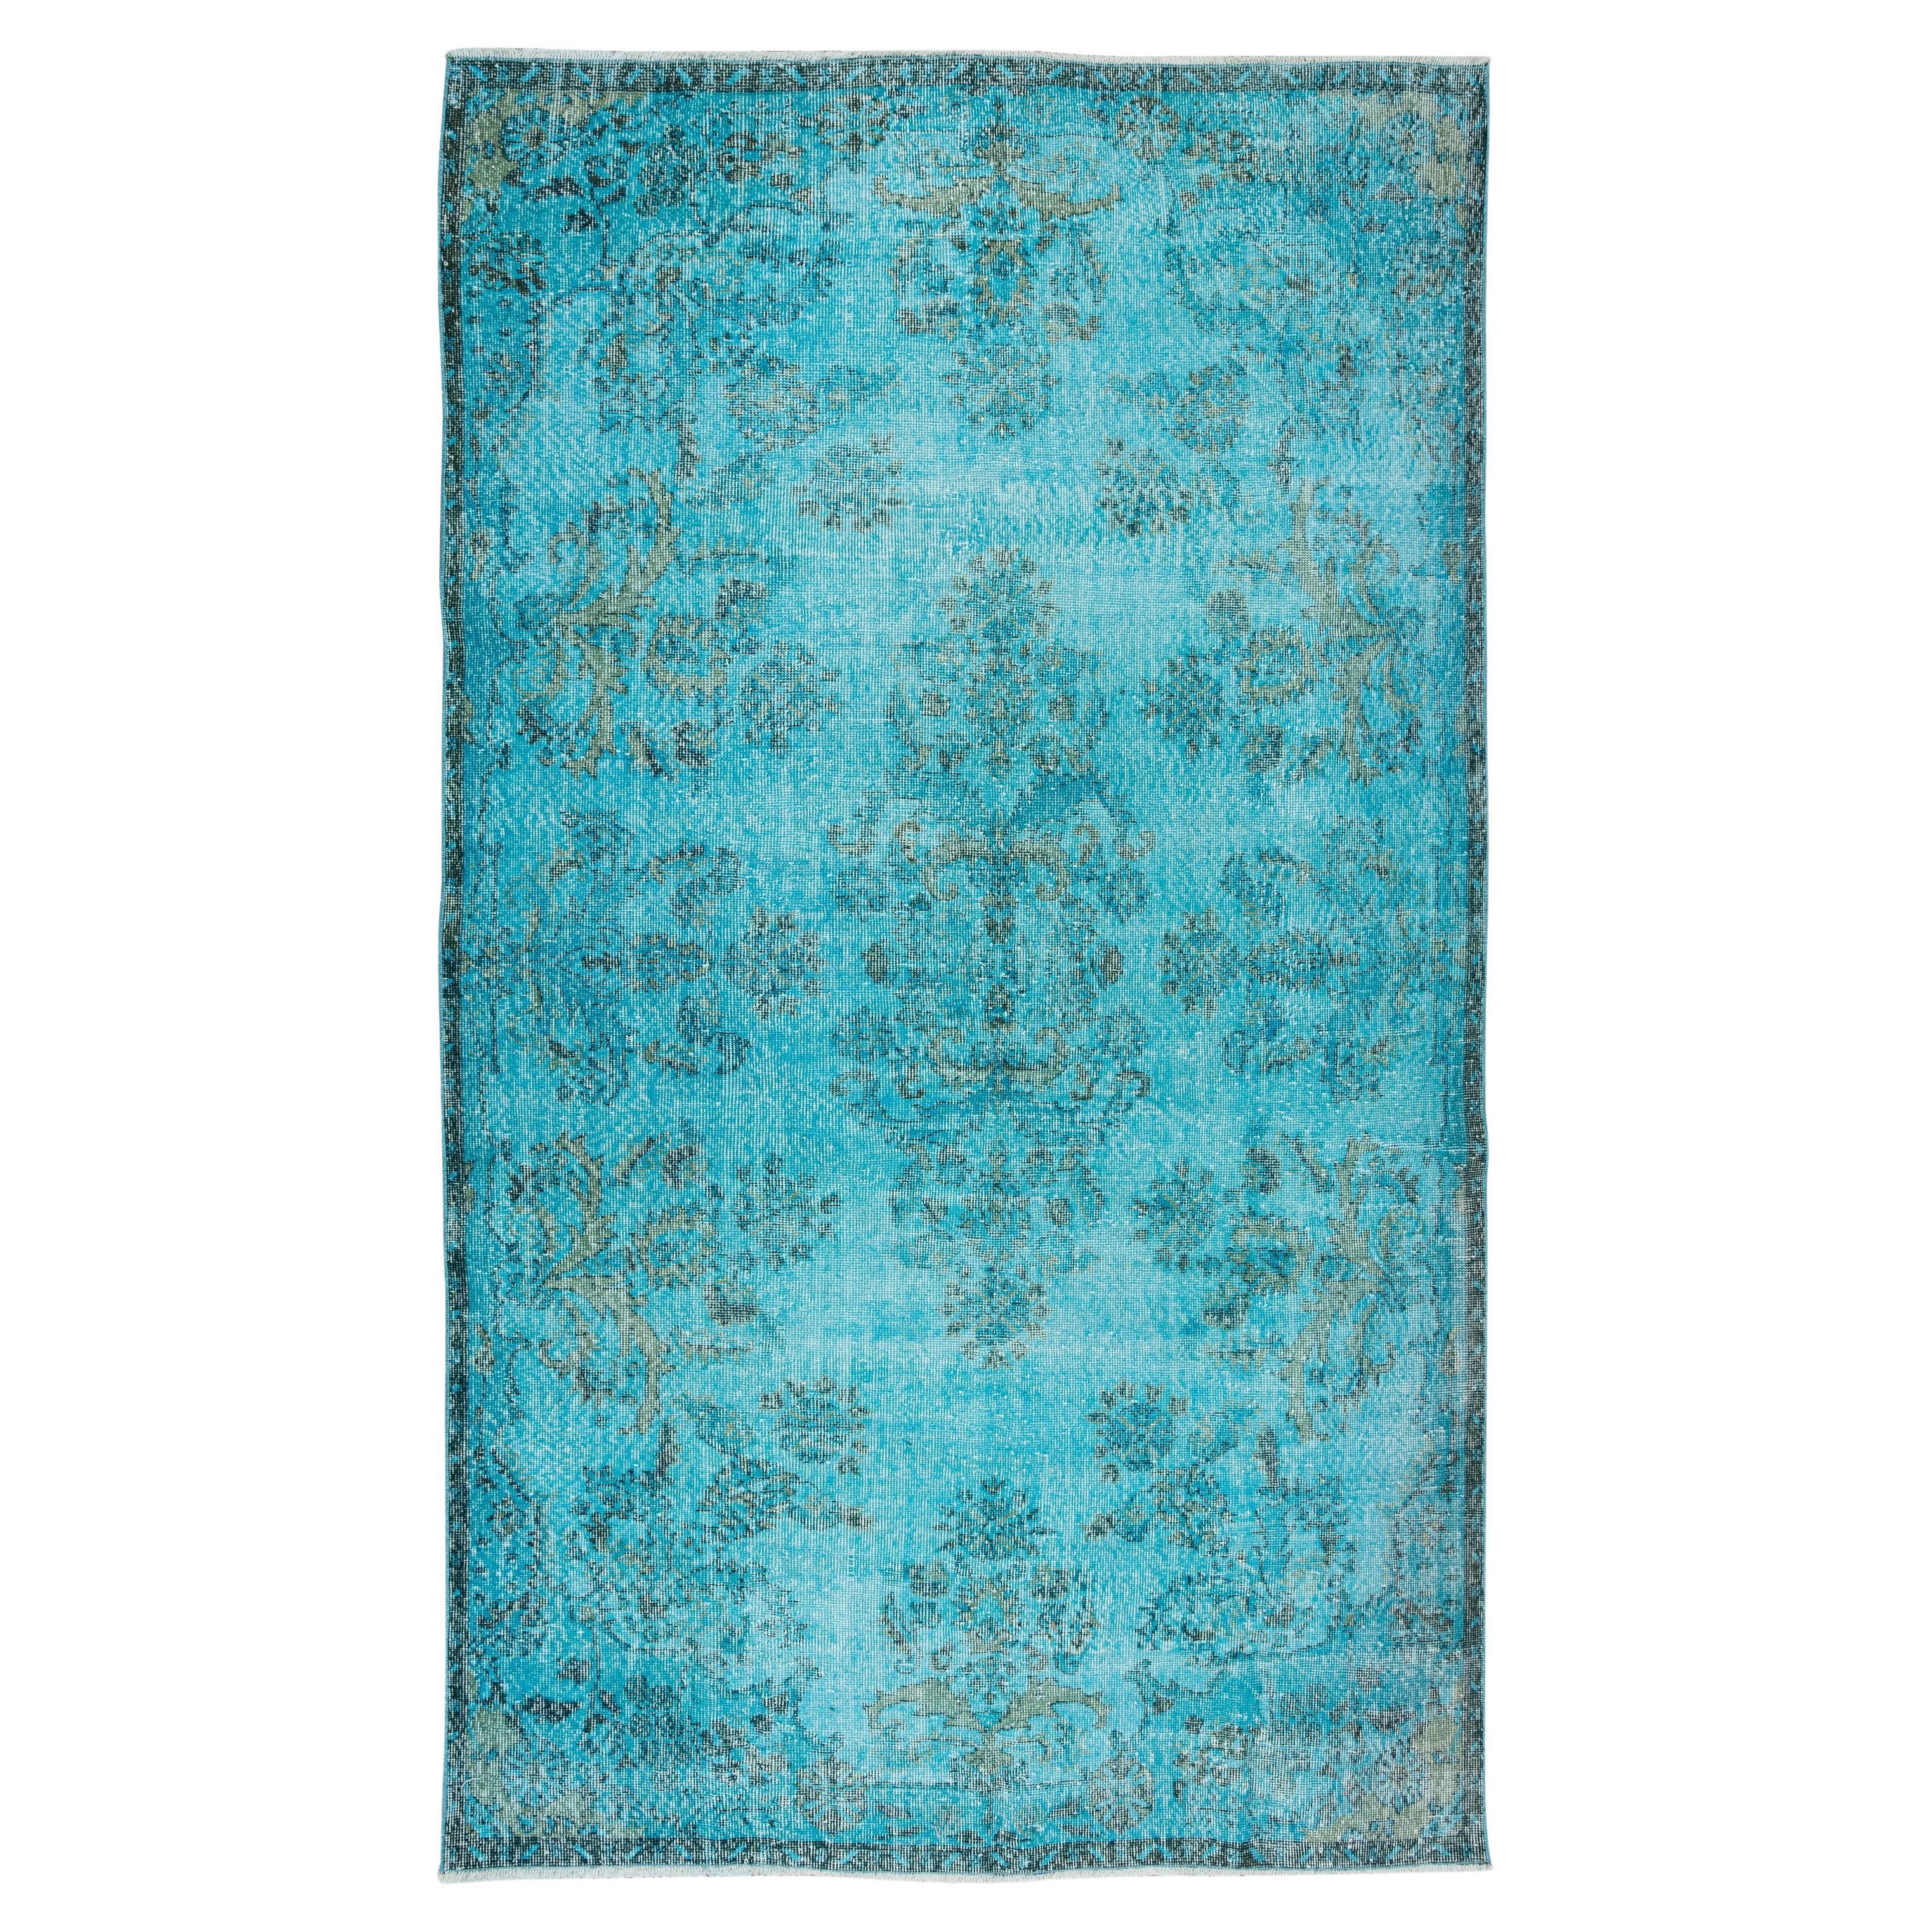 6x10.3 Ft Hand-Knotted Vintage Turkish Rug Over-Dyed in Teal for Modern Interior